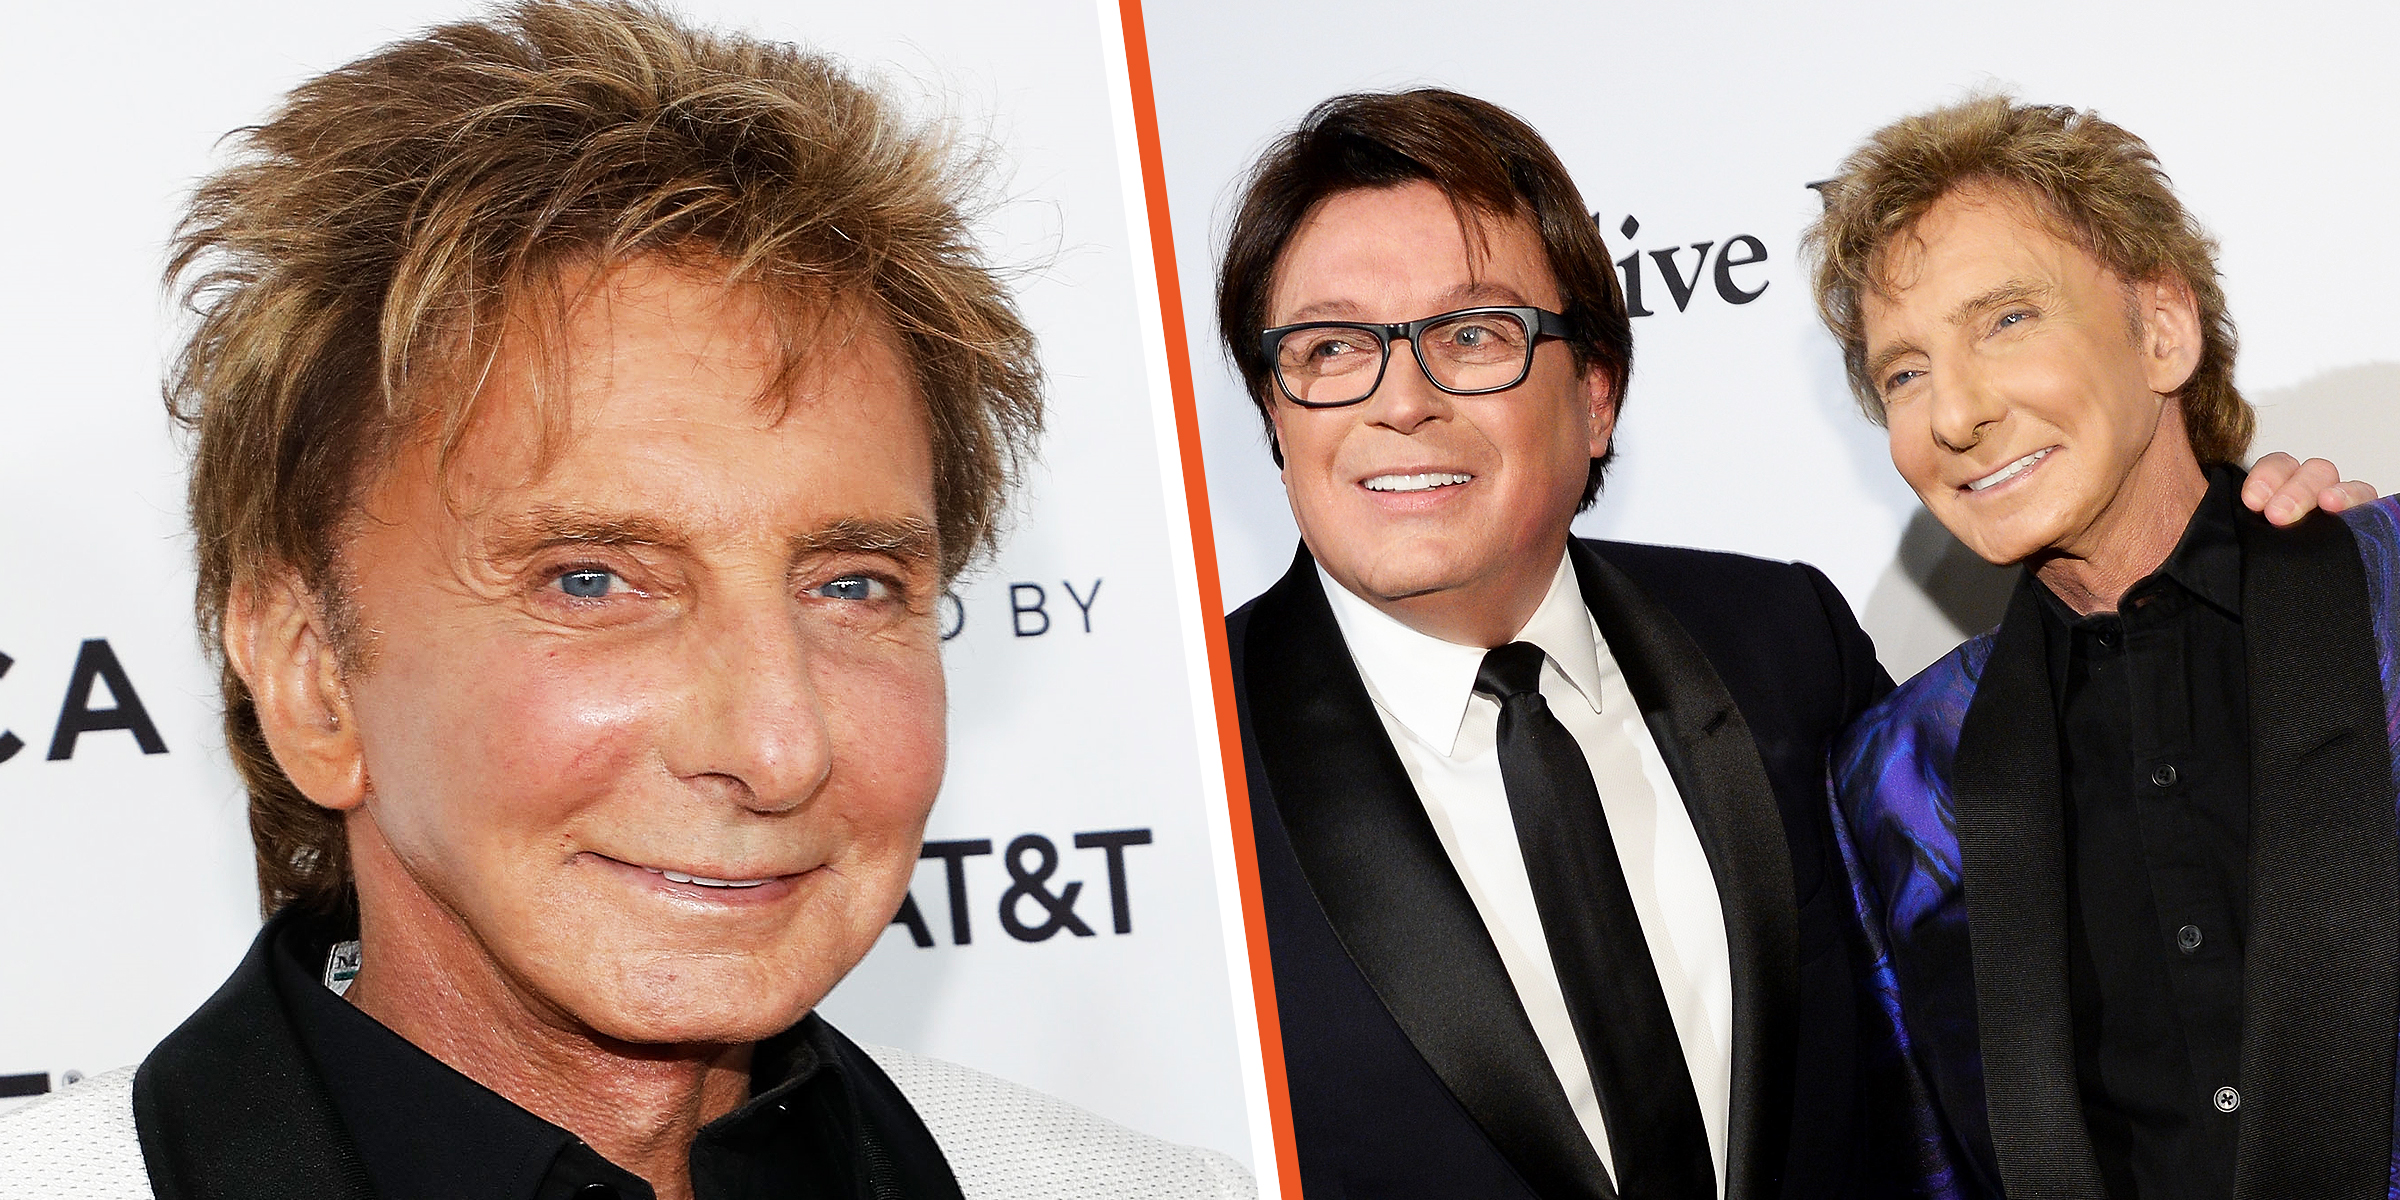 Barry Manilow | Garry Kief and Barry Manilow | Source: Getty Images